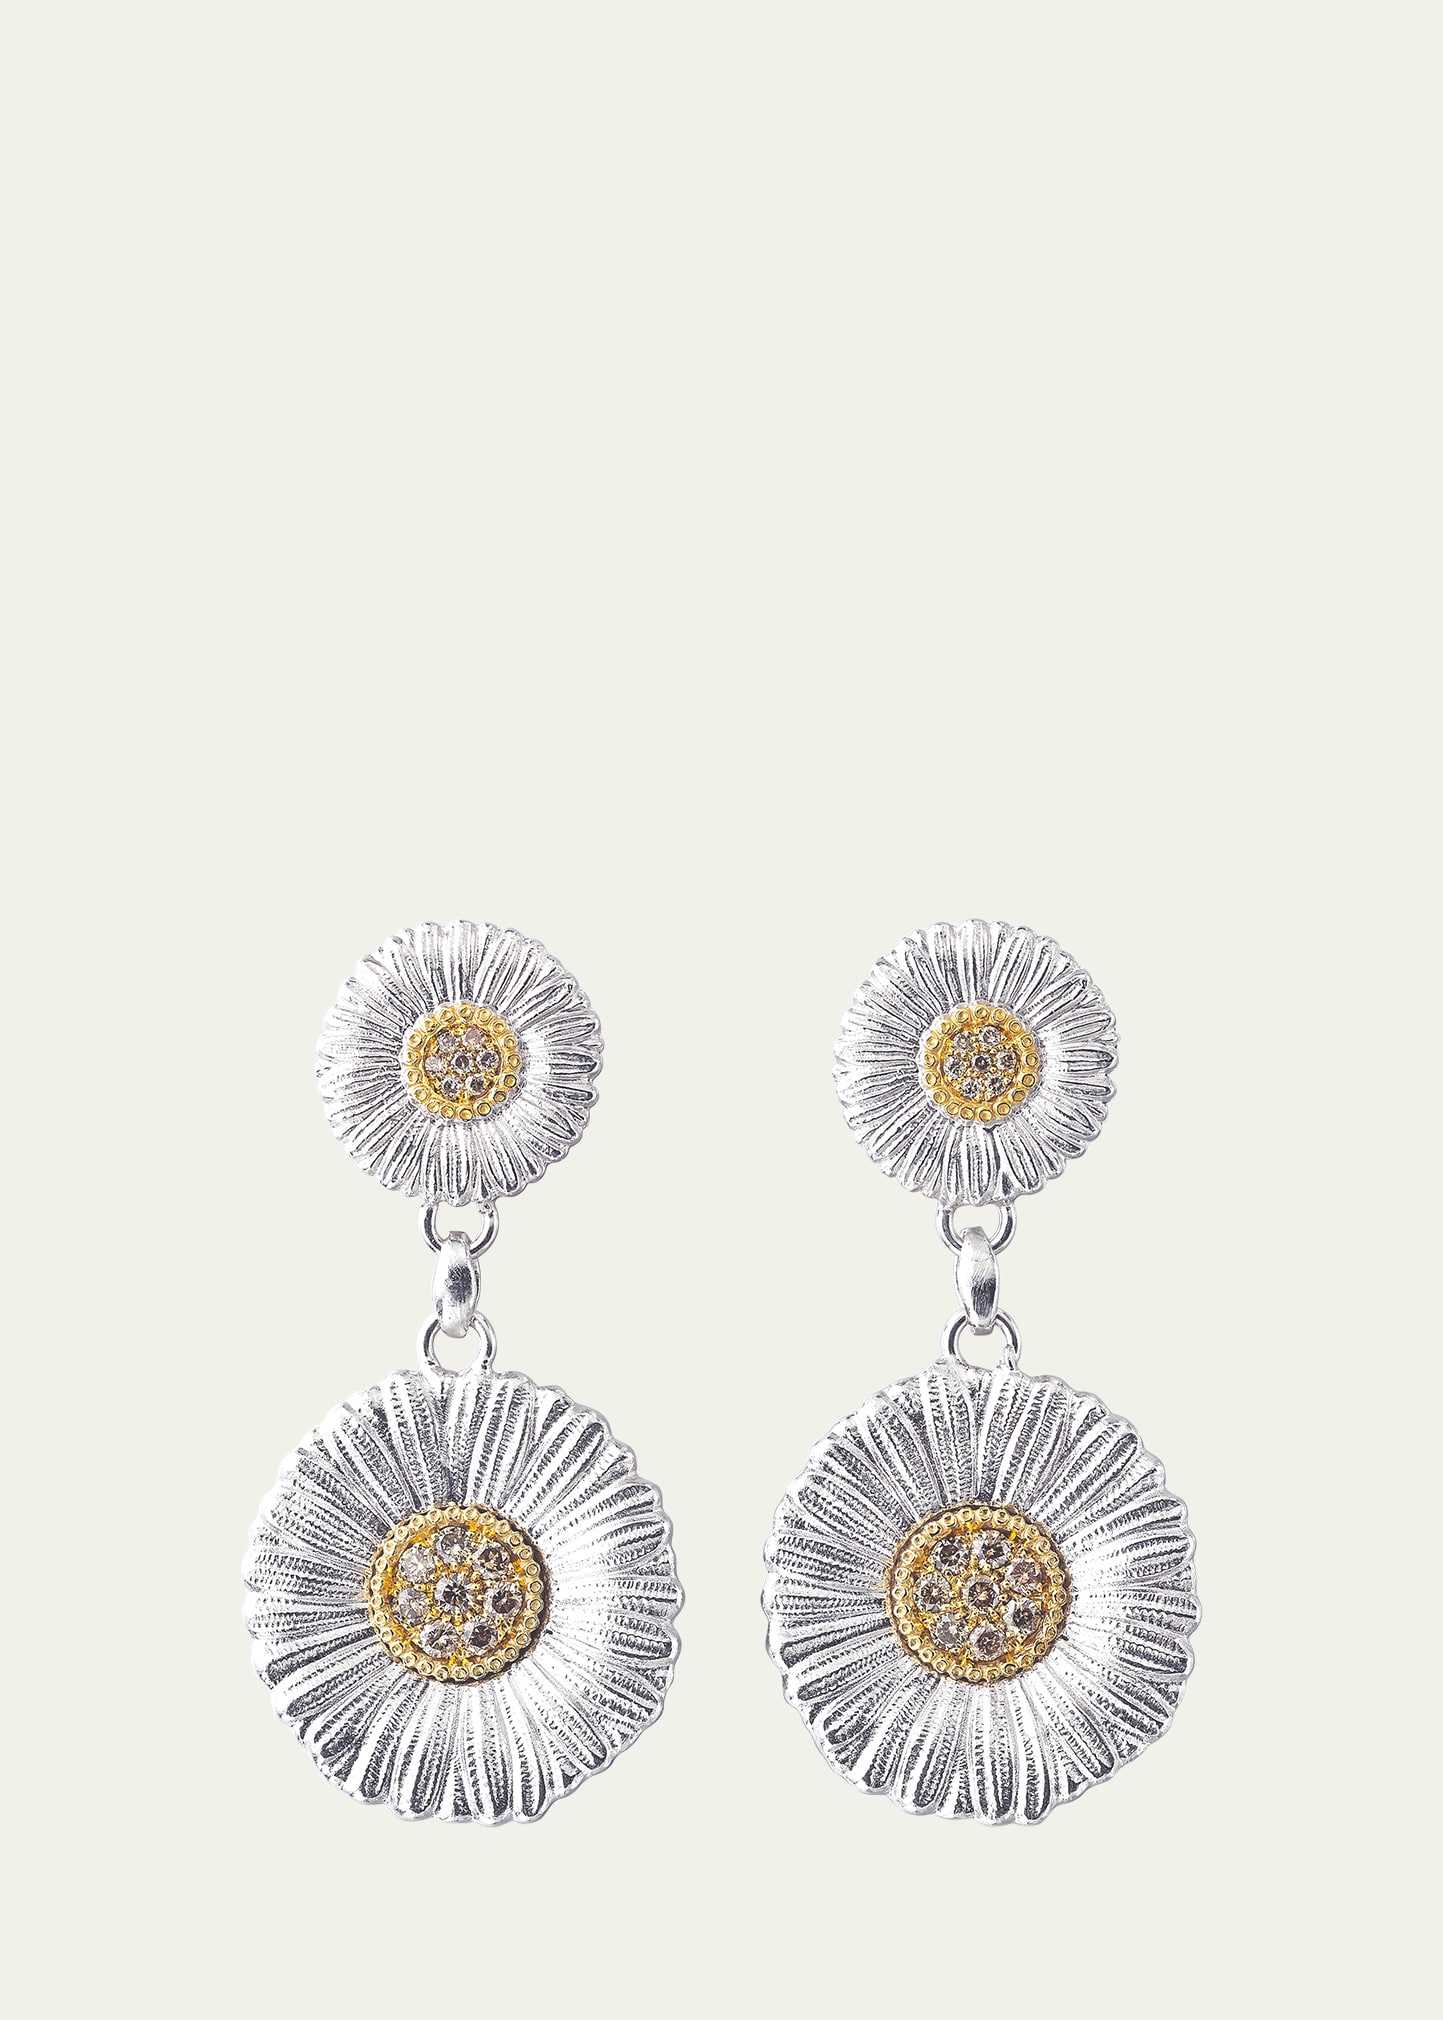 Blossoms Daisy Sterling Silver and 18K Yellow Gold Diamond Pendant Earrings, 7cm